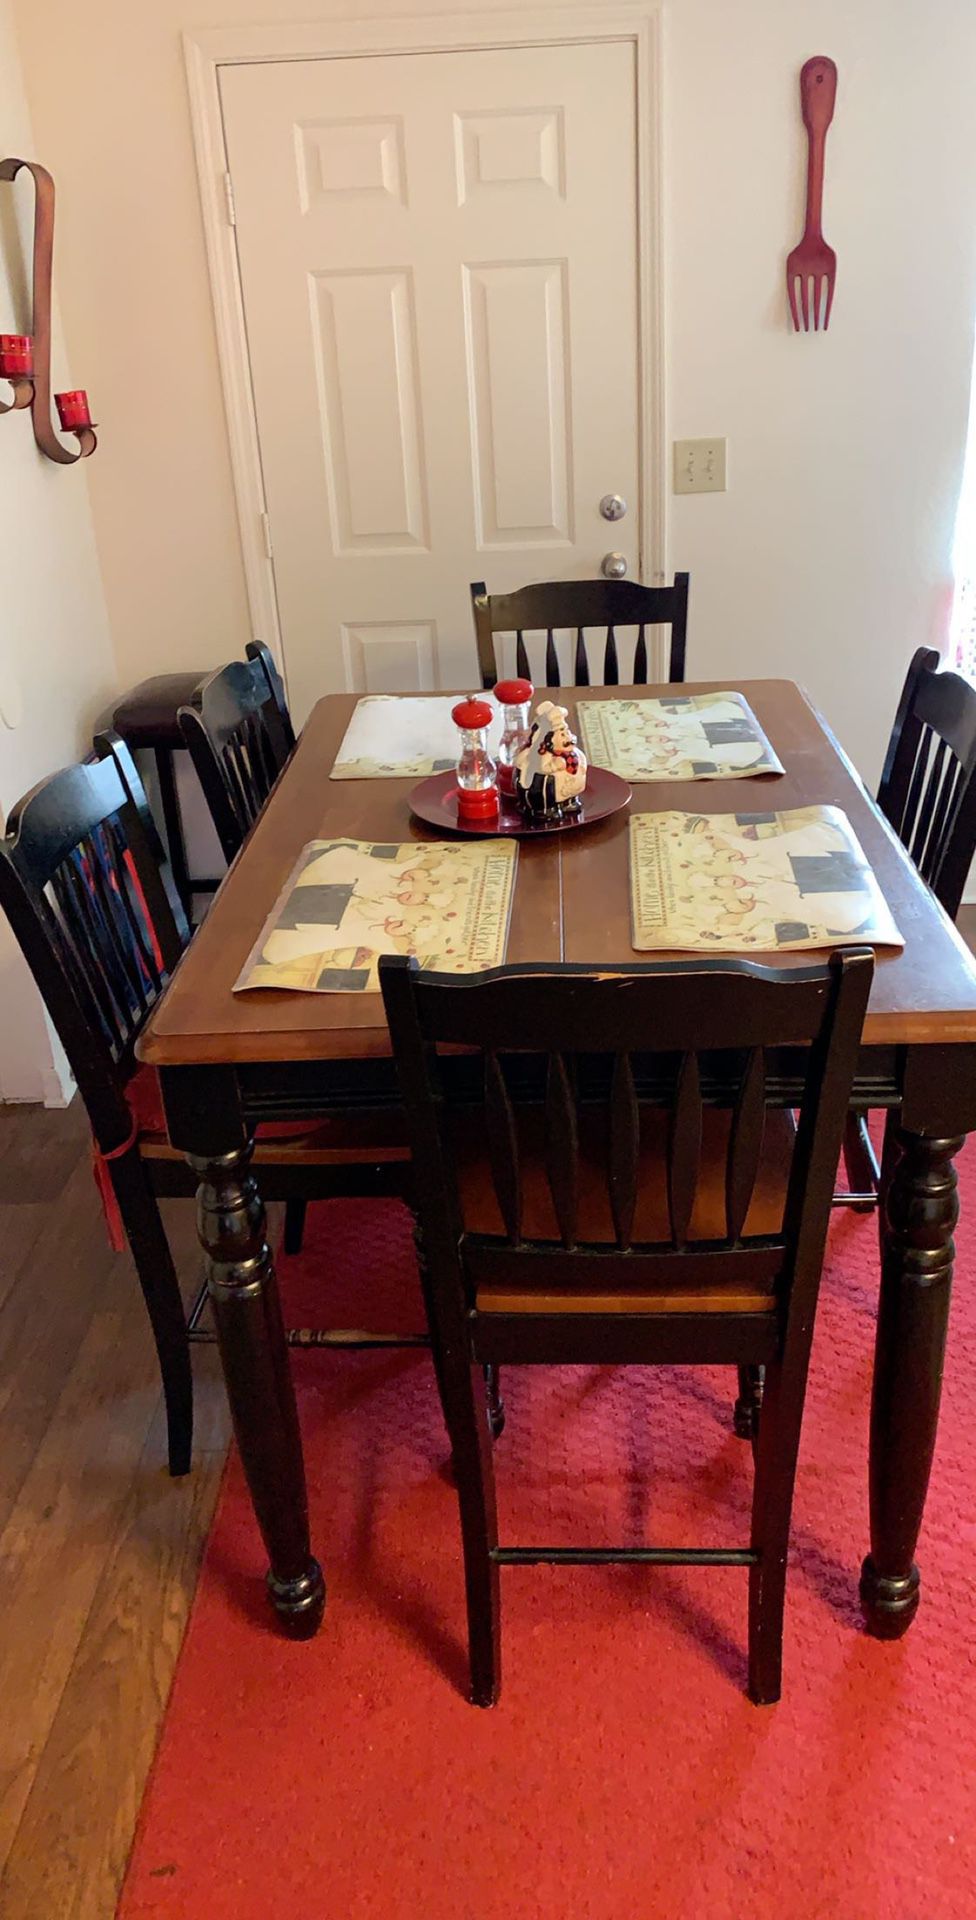 Kitchen table and chairs $175 OBO